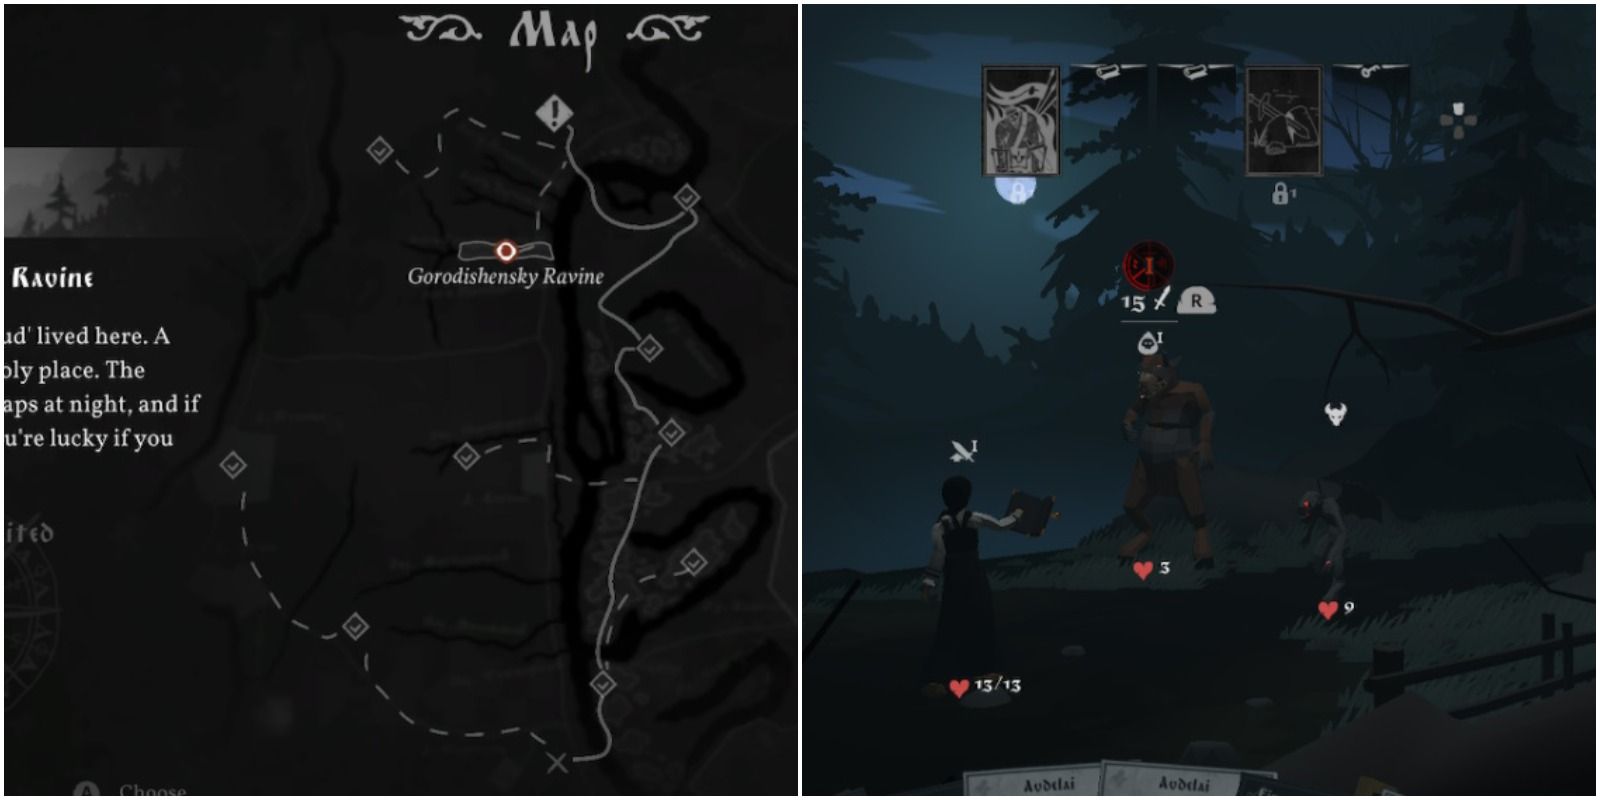 gorodishensky ravine on the map and the demons there fighting the player.